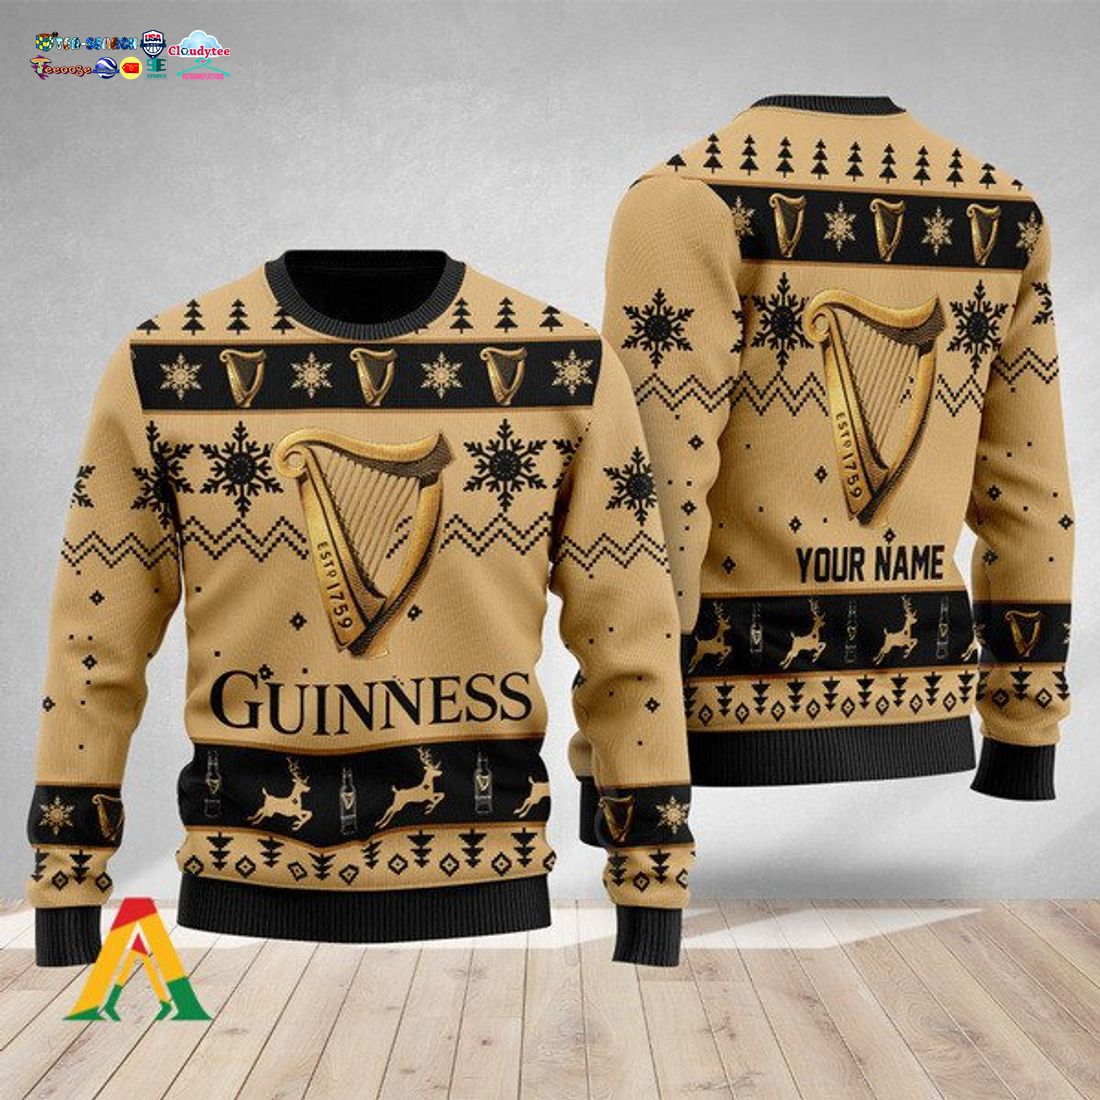 Personalized Name Guinness Ver 2 Ugly Christmas Sweater - Stand easy bro